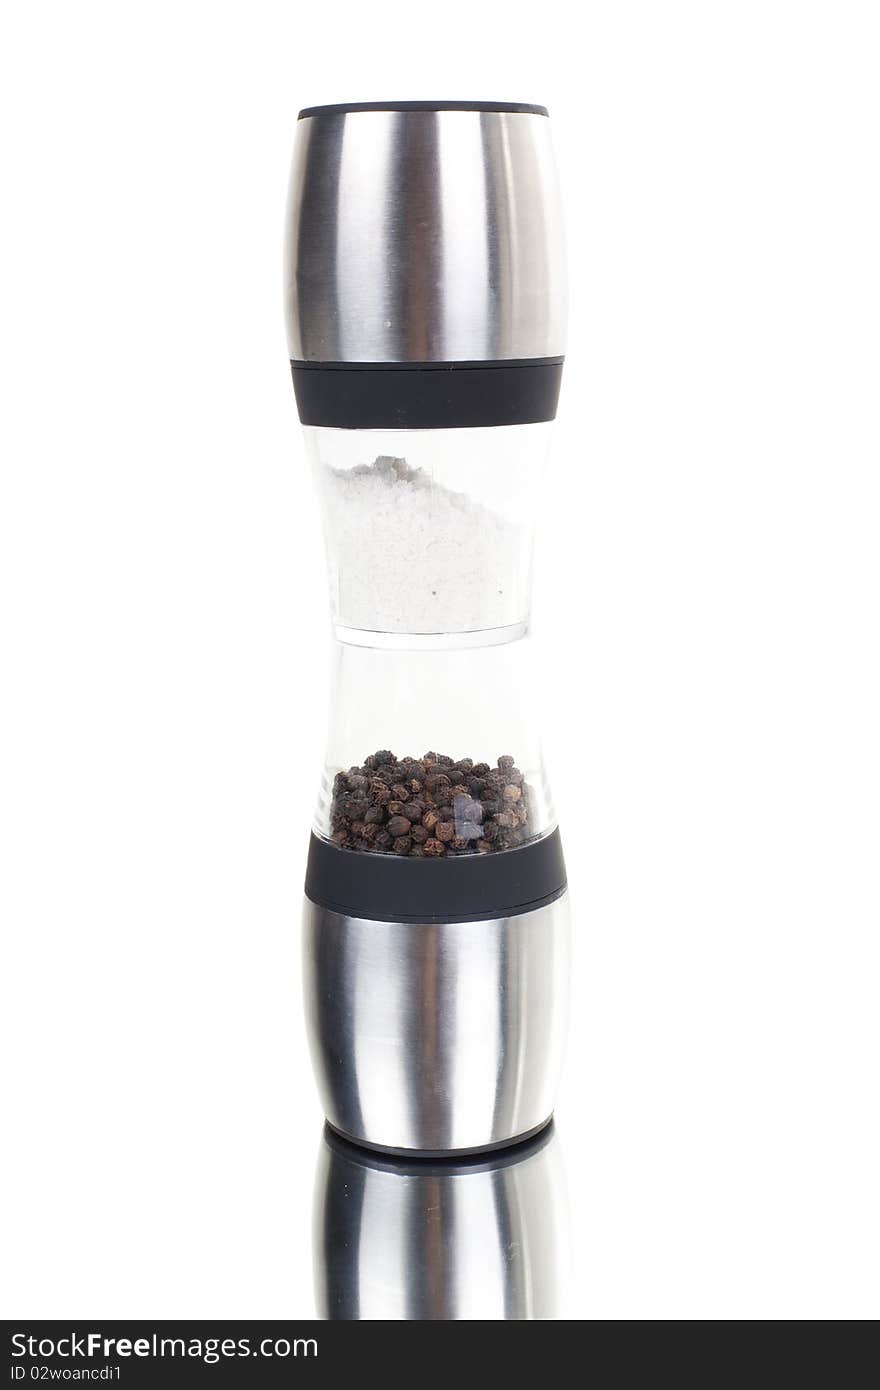 Series. A glass grinder of pepper isolated on a white background